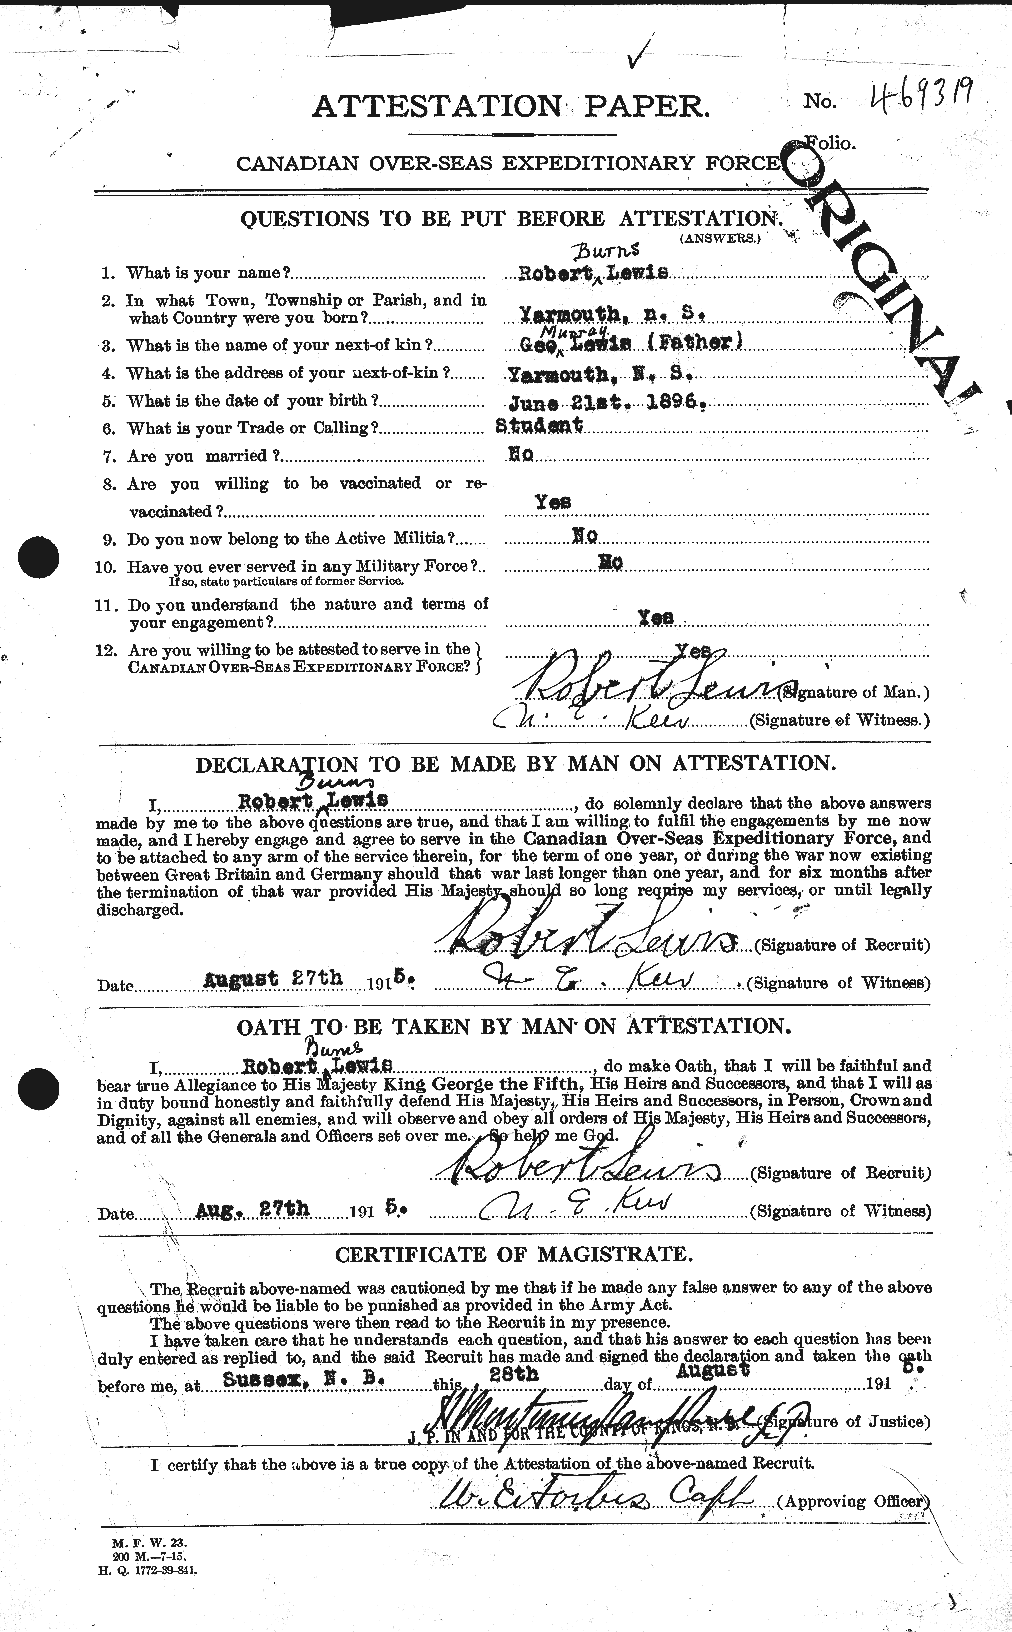 Personnel Records of the First World War - CEF 463900a